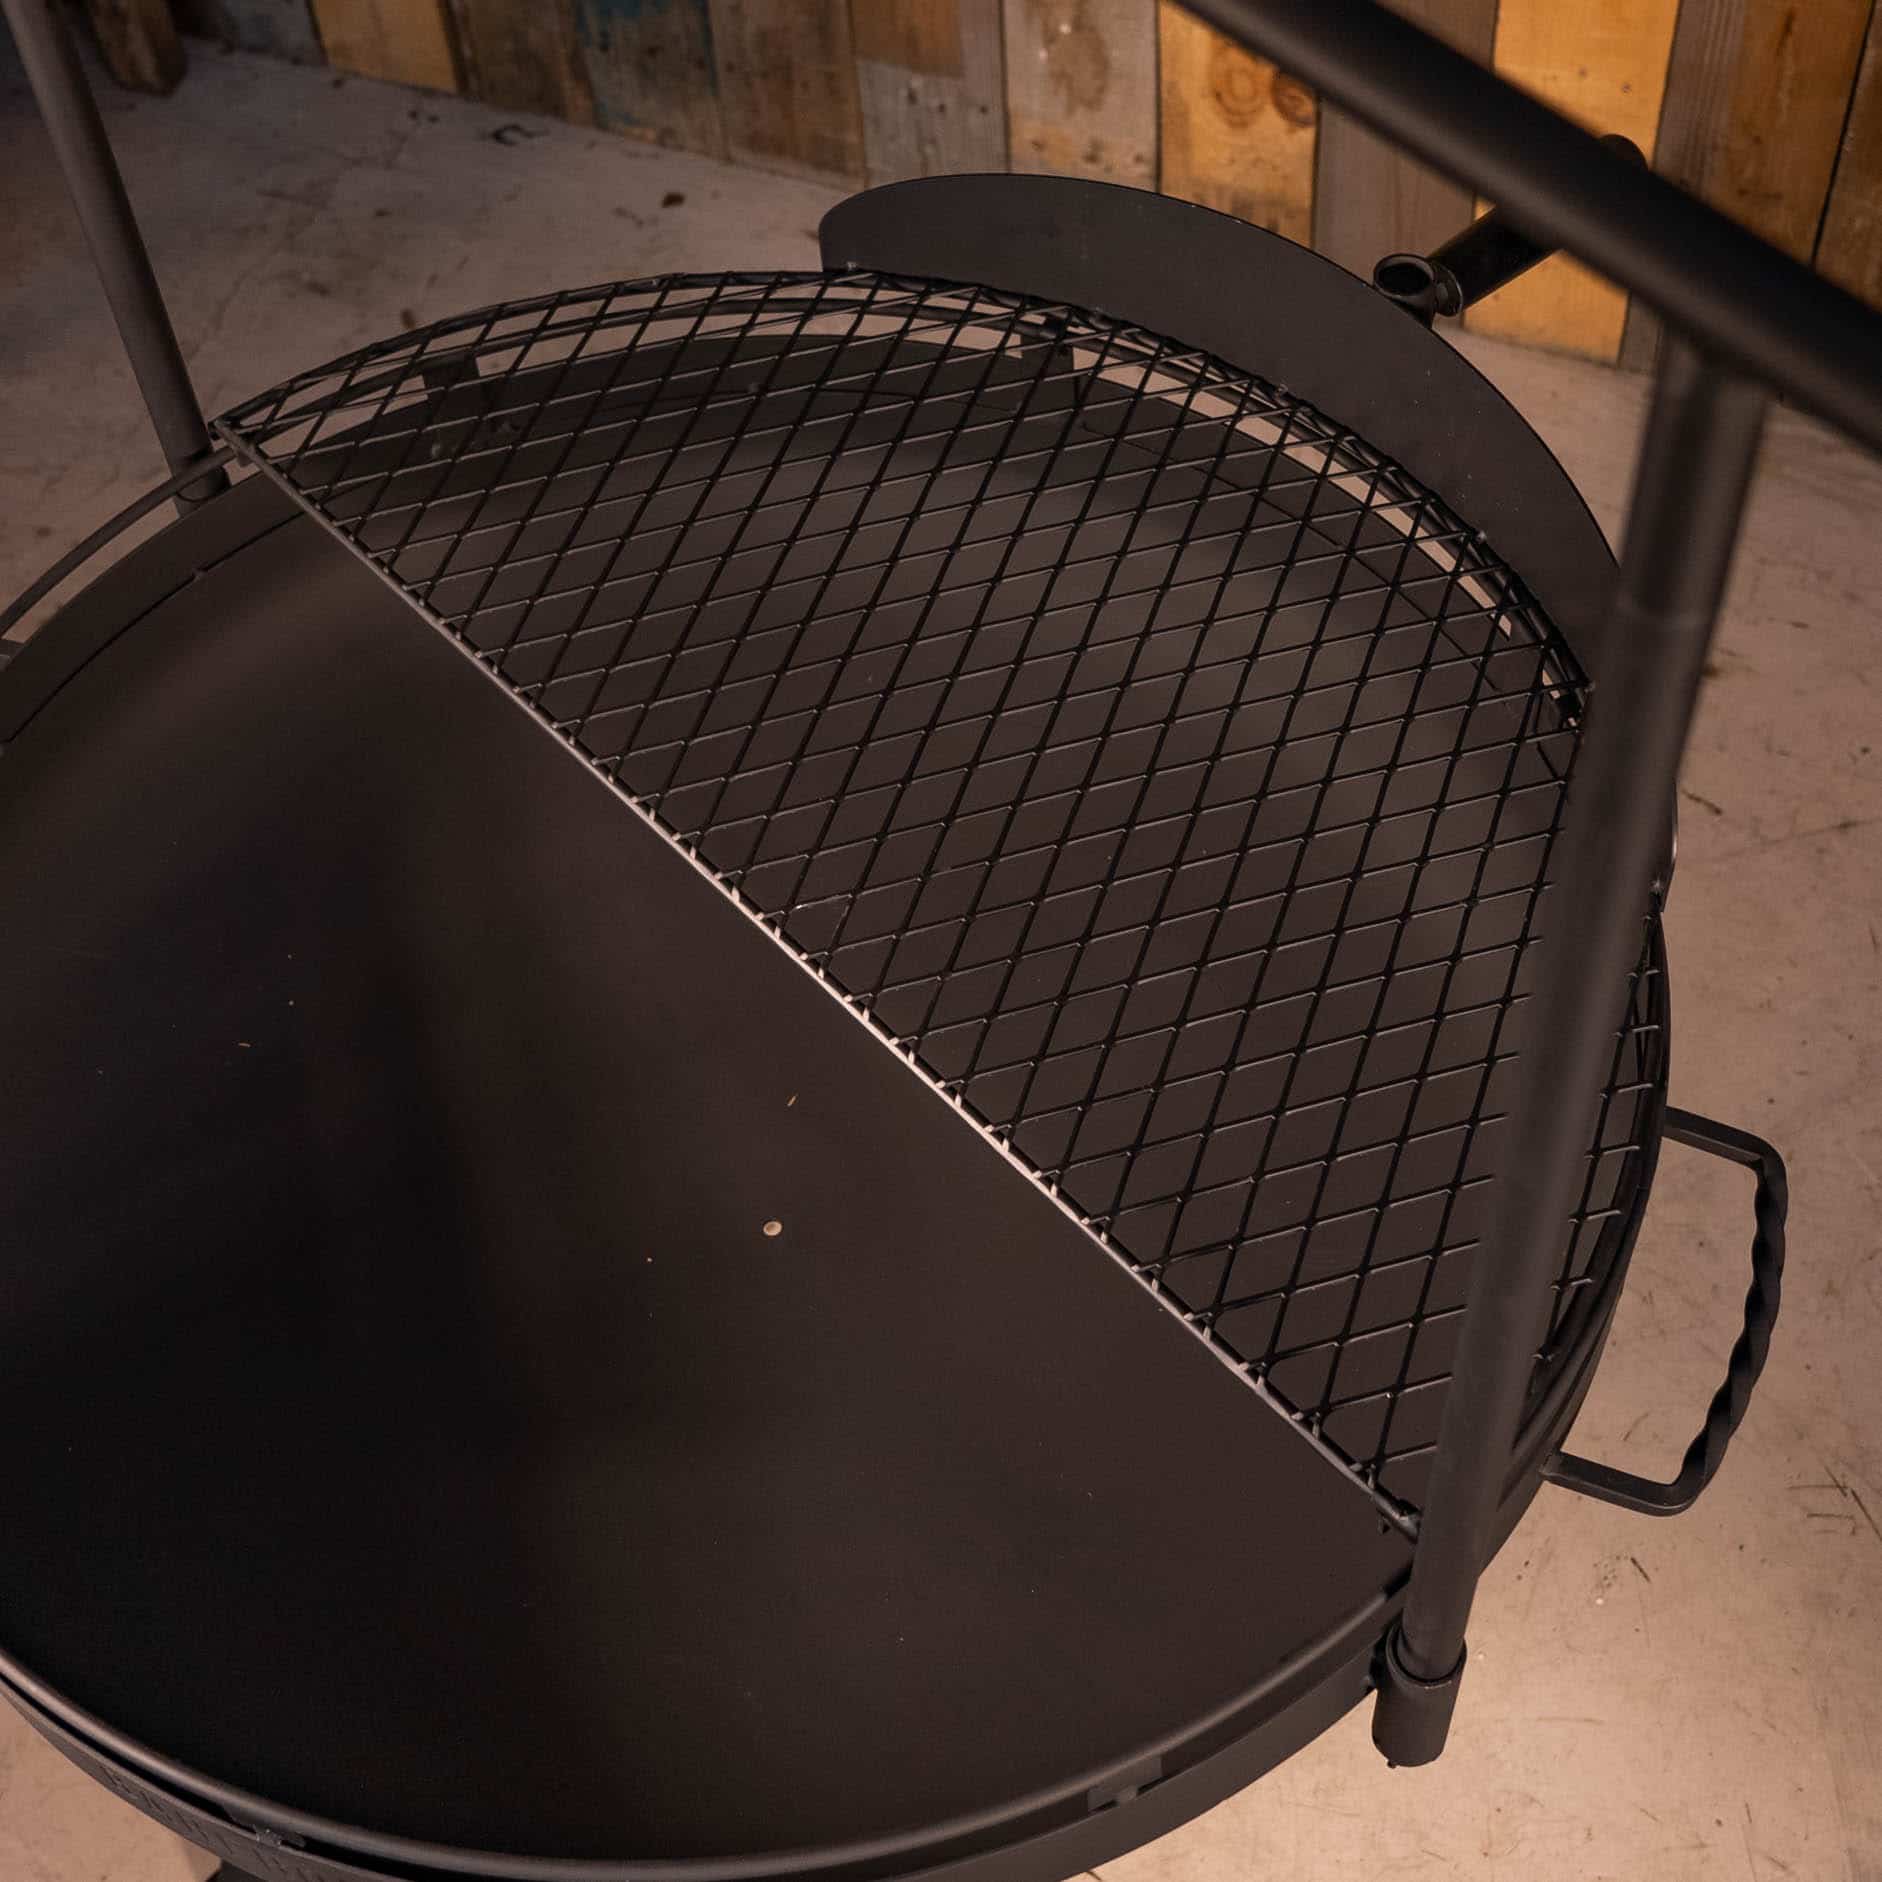 Barebones Cowboy Fire Pit Grill System - Small